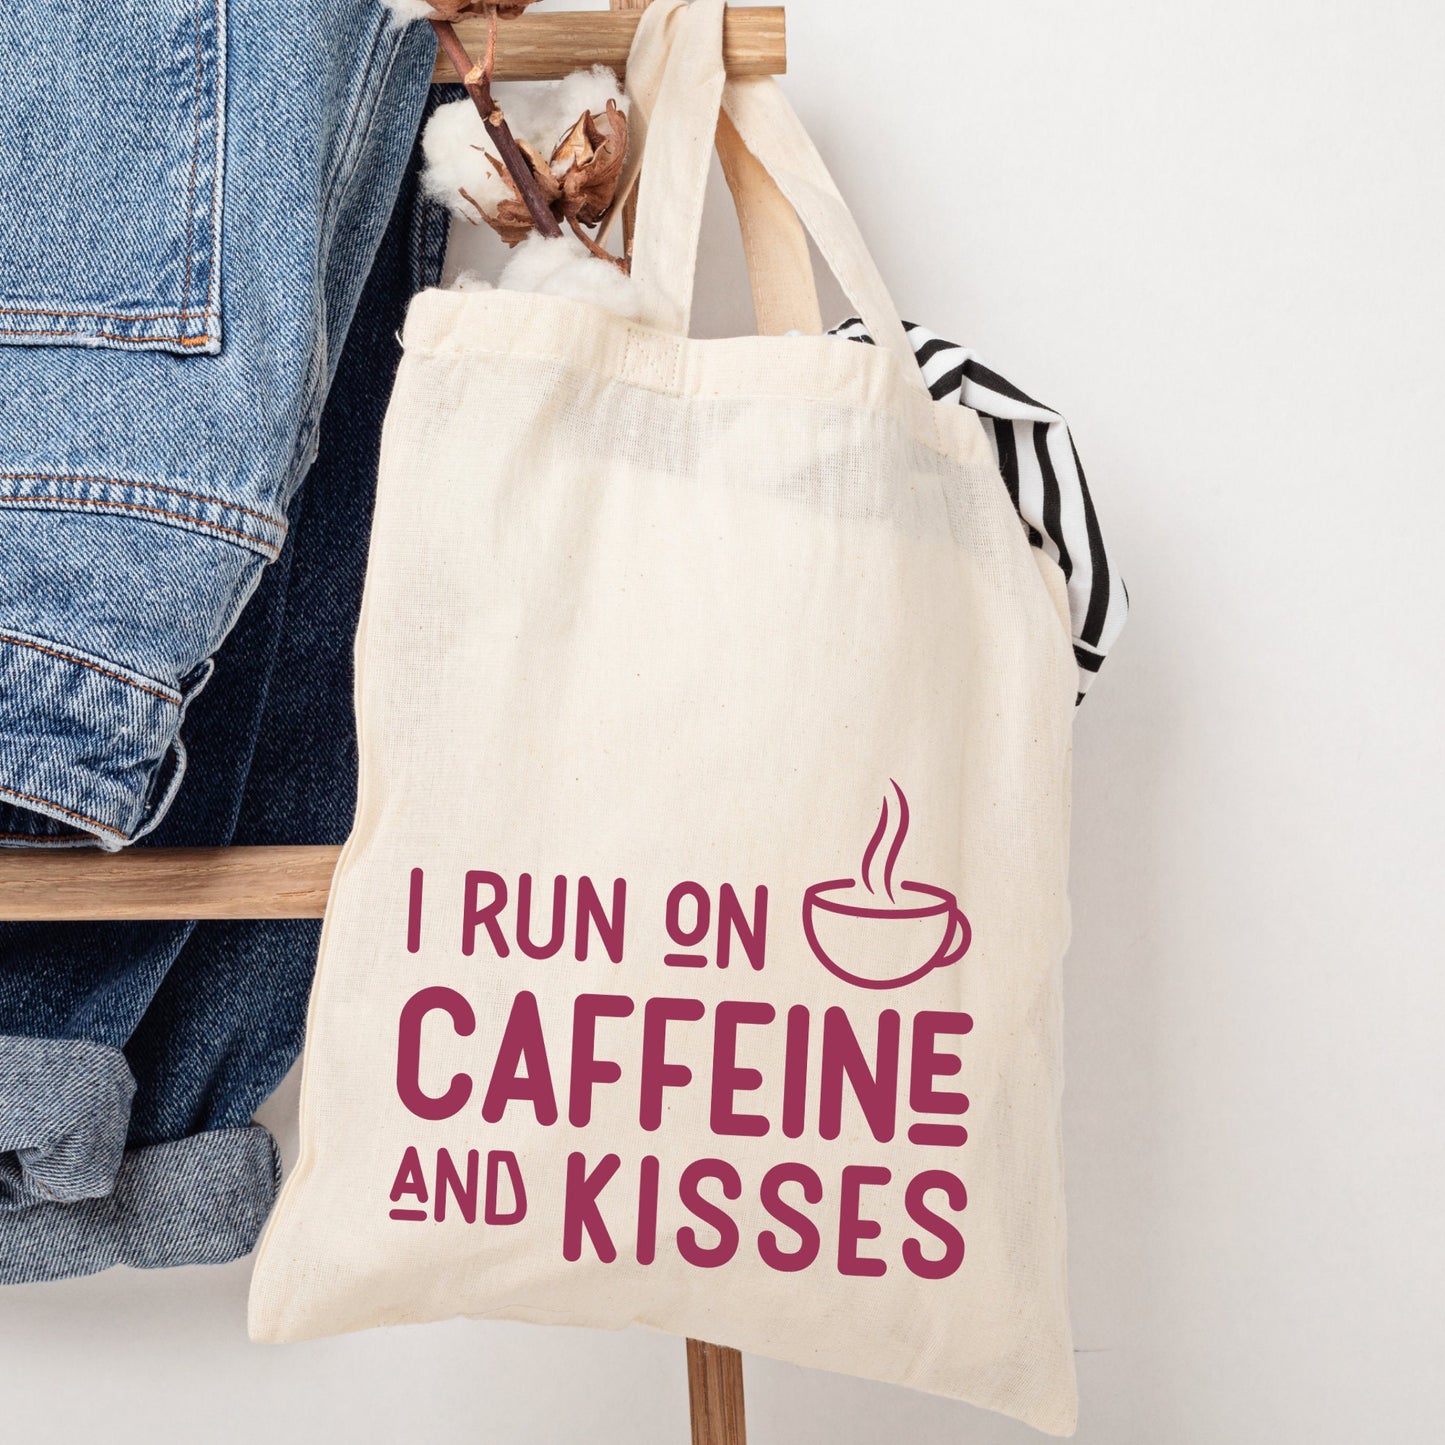 I run on caffeine and kisses tote bag, college uni tote bag, fun bags, Xmas gifts, stocking fillers, teenage daughter, neice Christmas gift